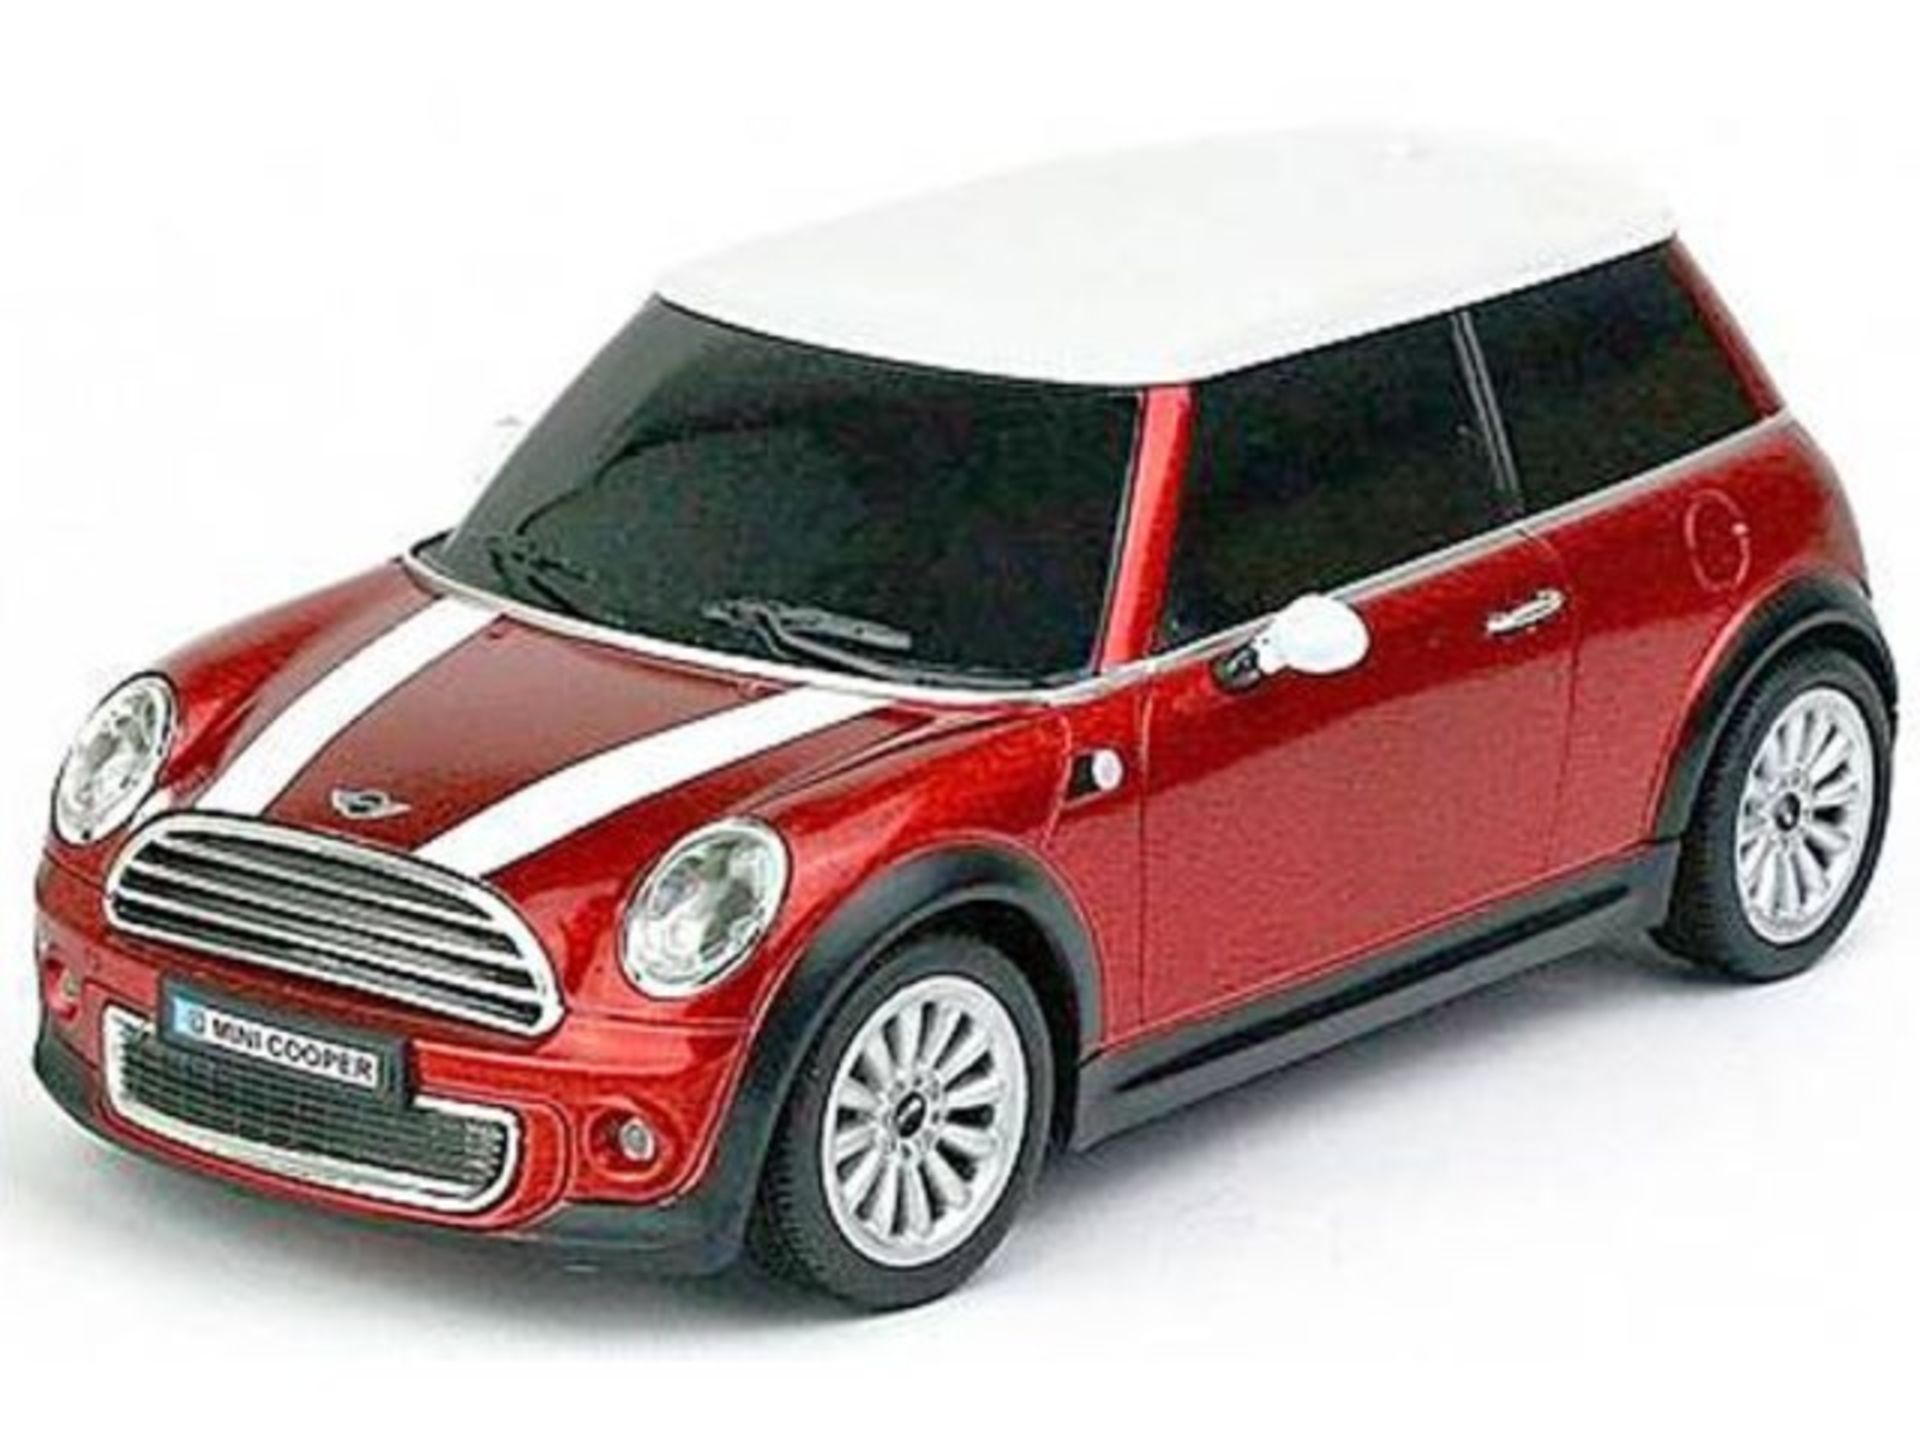 V *TRADE QTY* Brand New 1:14 Scale R/C Mini Cooper S In Red Officially Licensed Product X 3 YOUR BID